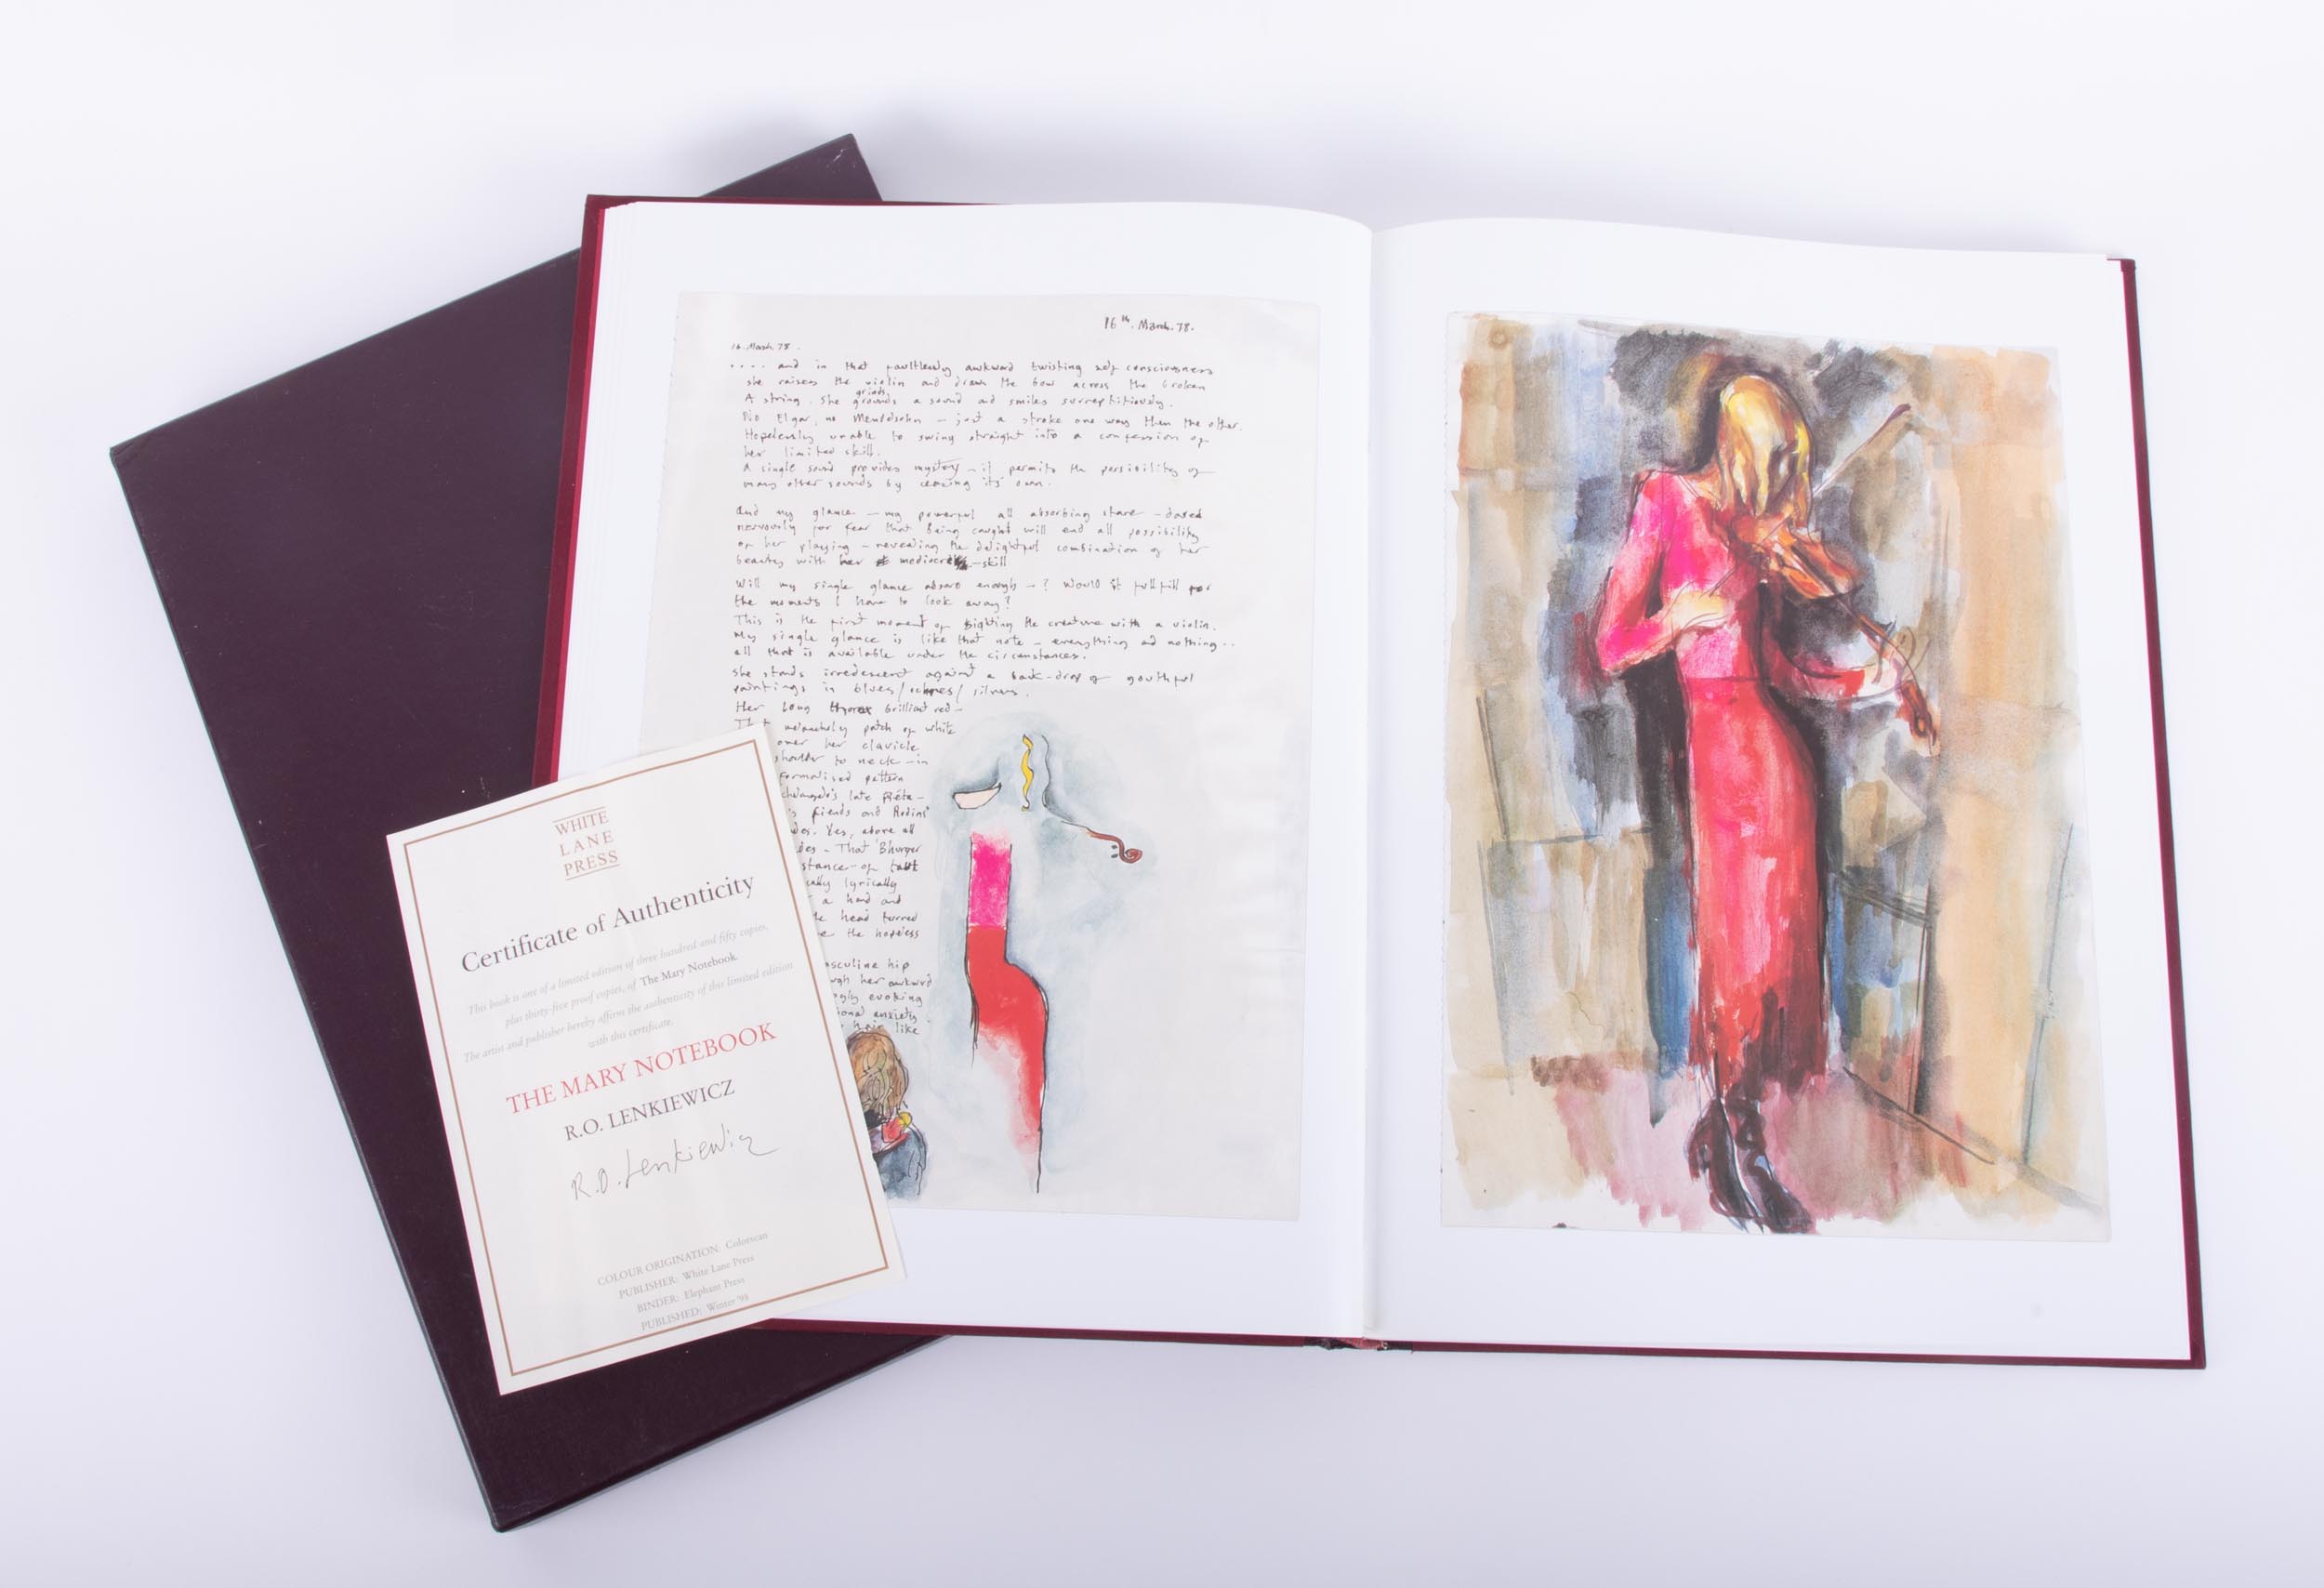 Robert Lenkiewicz, The Mary Notebook, with signed certificate from an edition of 350 with outer